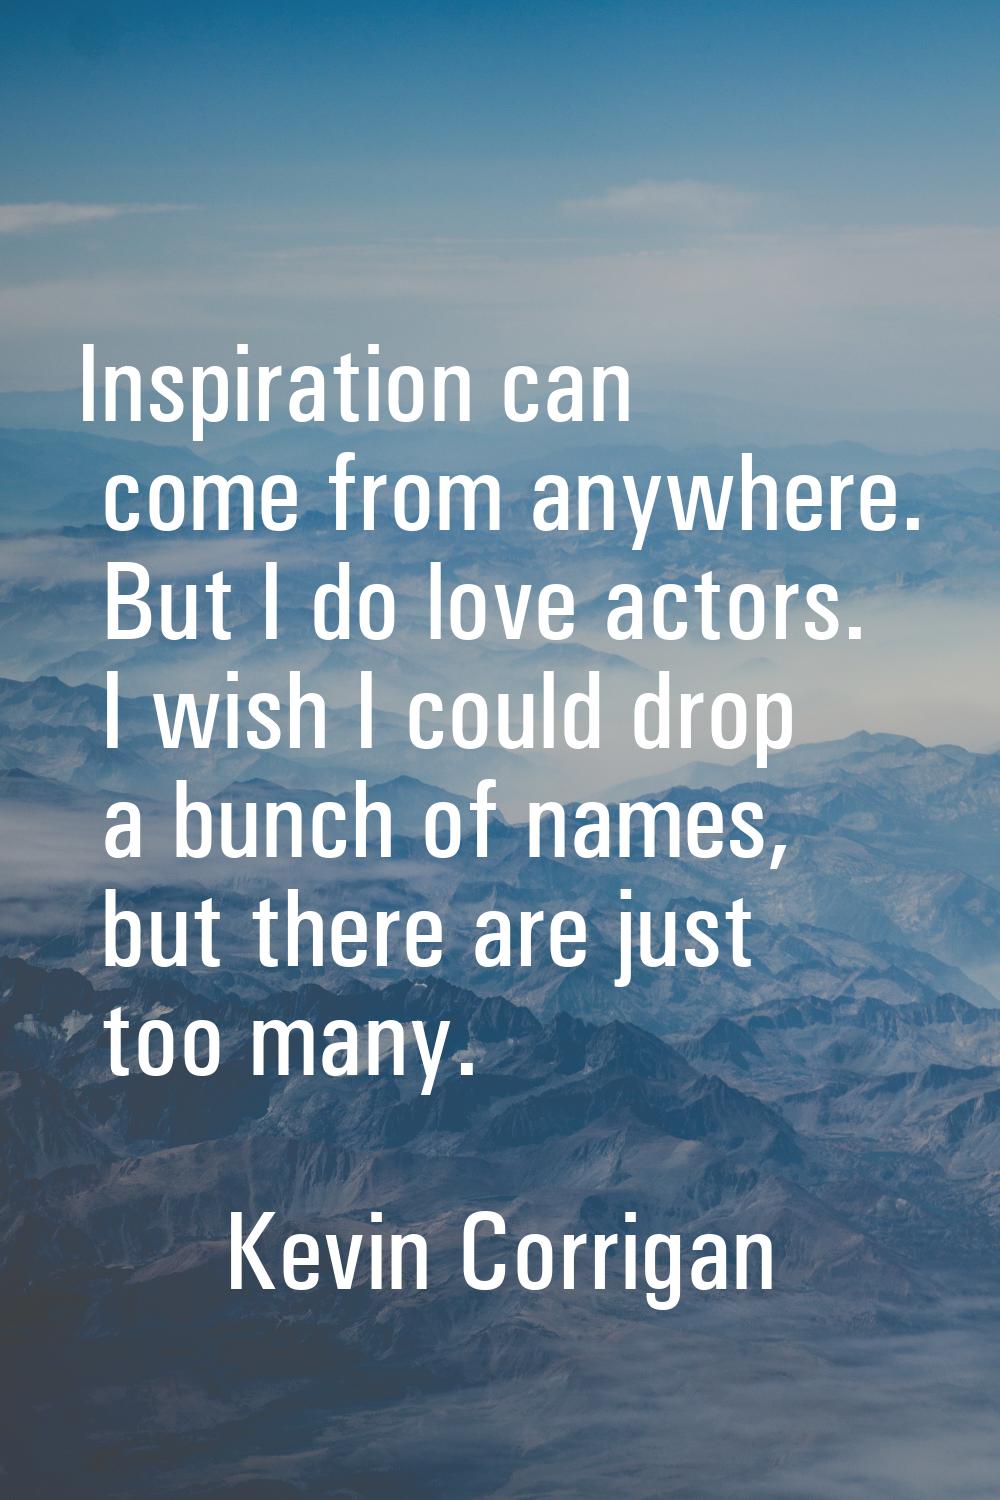 Inspiration can come from anywhere. But I do love actors. I wish I could drop a bunch of names, but